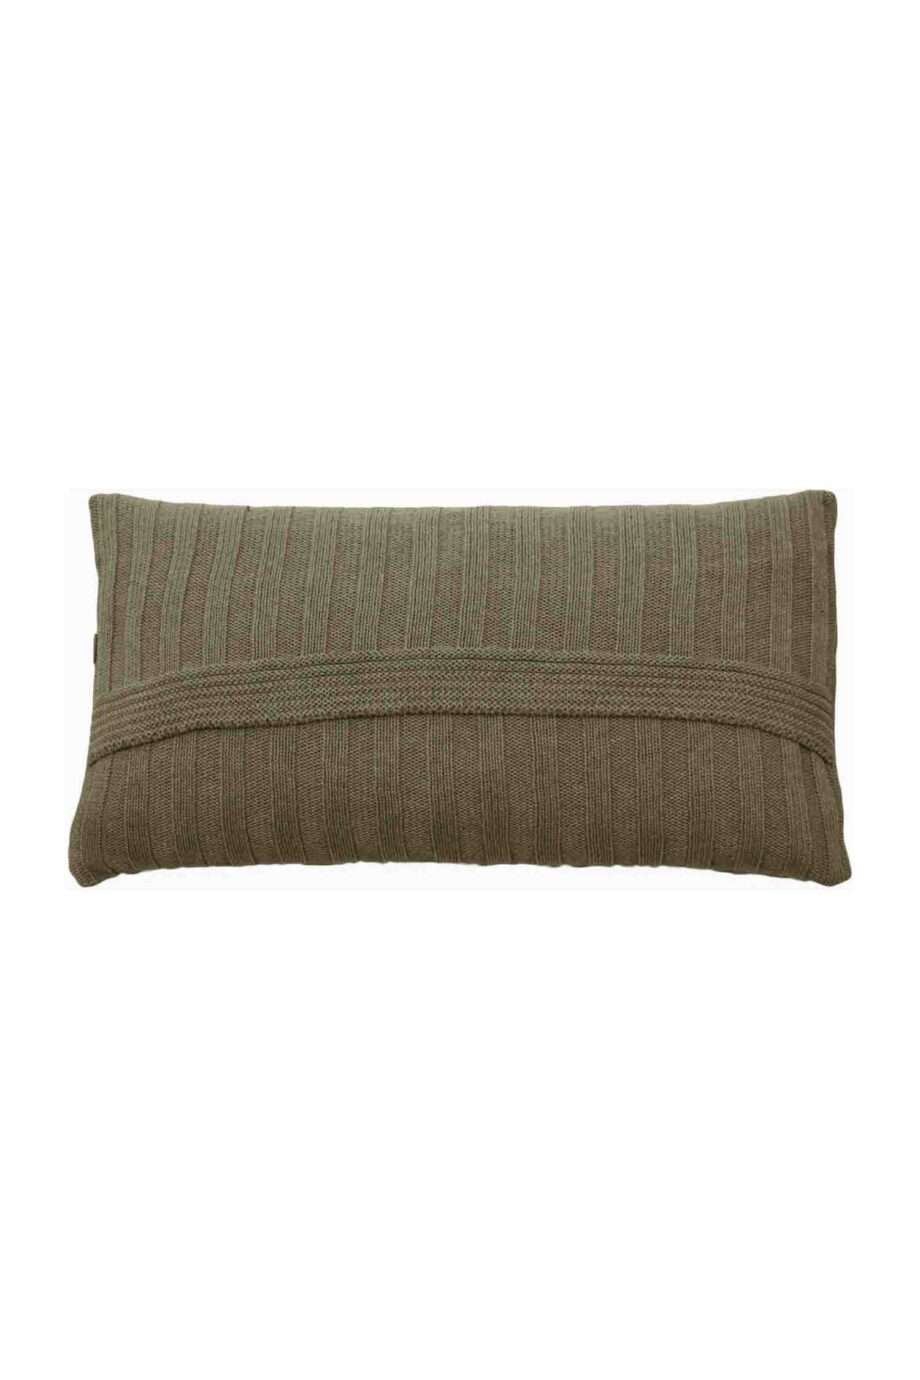 ribs olive green knitted cotton pillowcase small